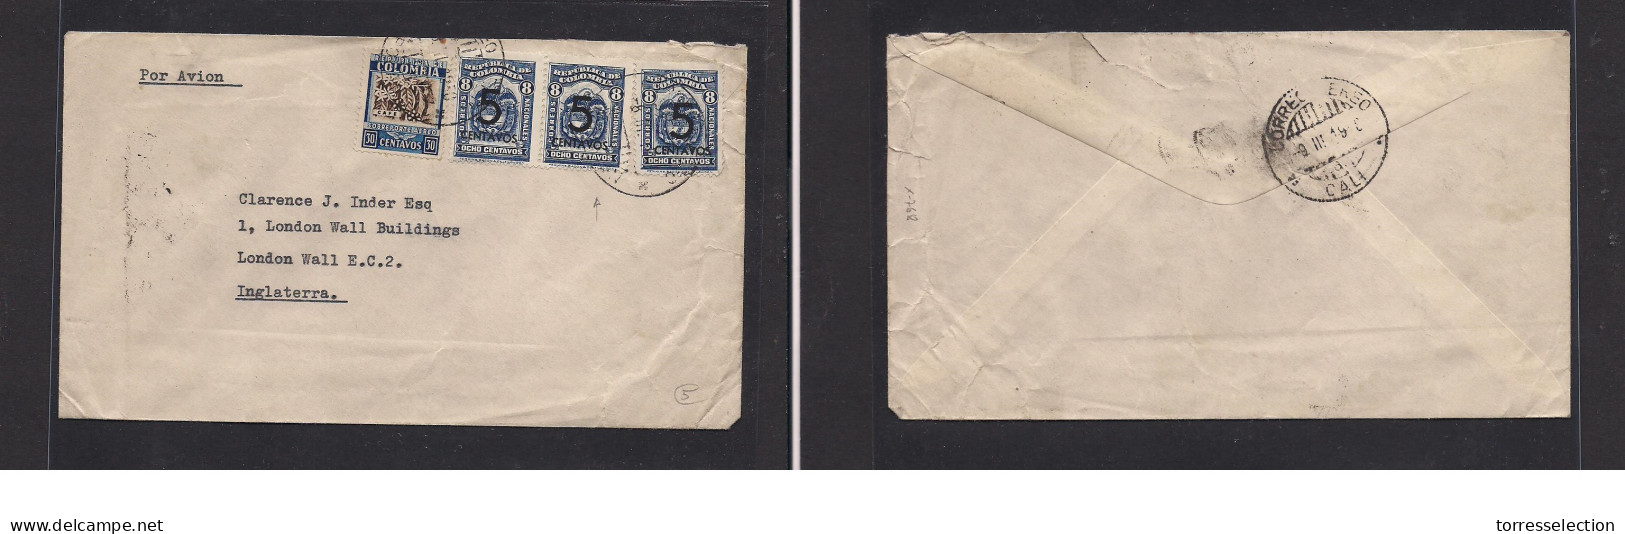 COLOMBIA. Colombia - Cover -  1938 Cali To UK Air Ovpt Mult Fkd Env. Easy Deal. - Colombie